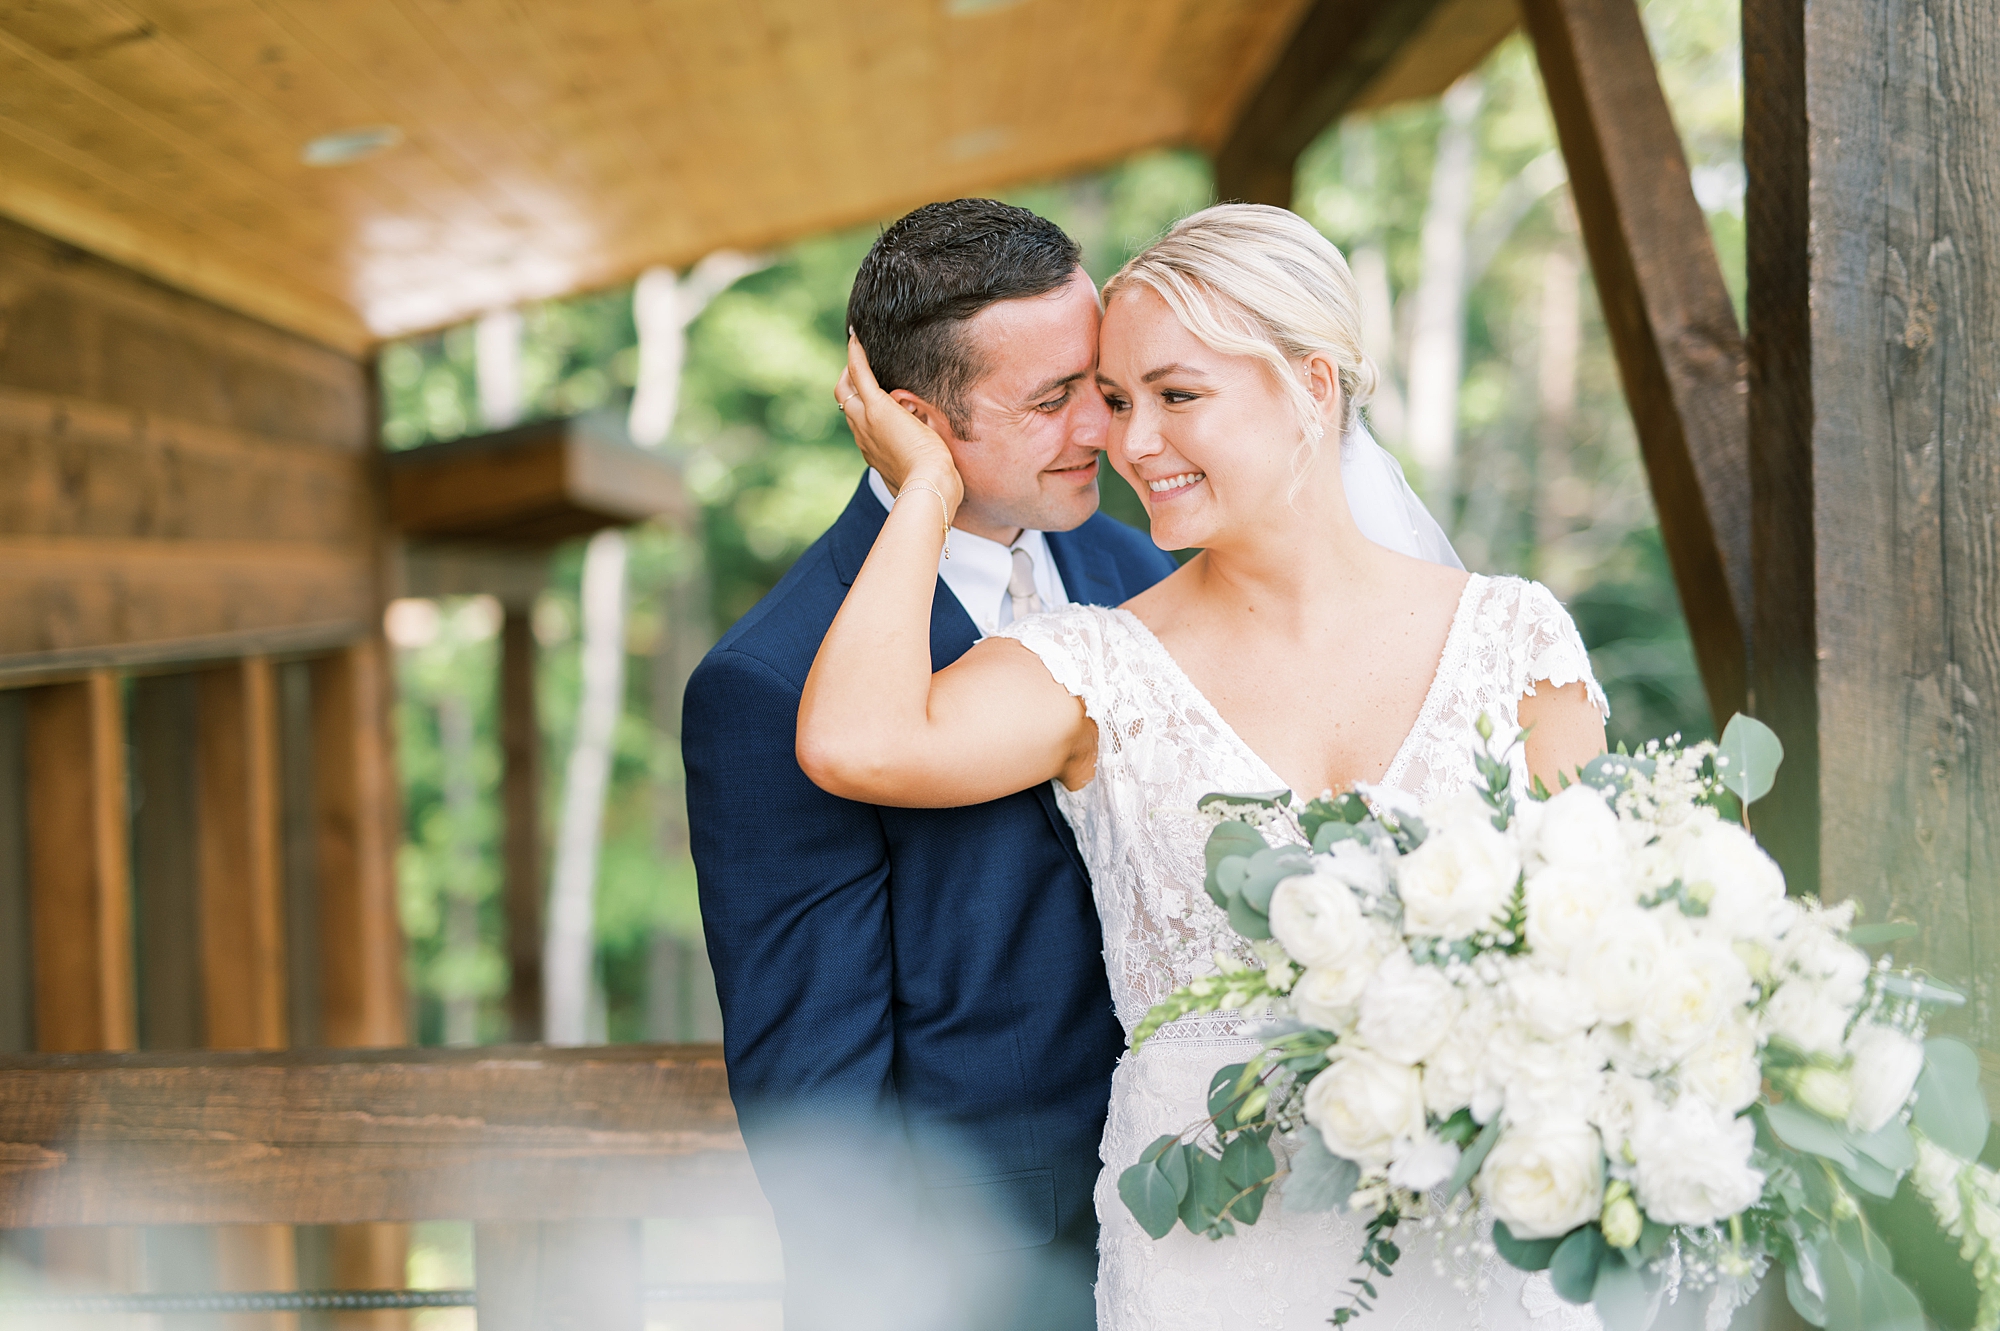 timeless wedding portraits photographed by destination wedding photographer Kera photography